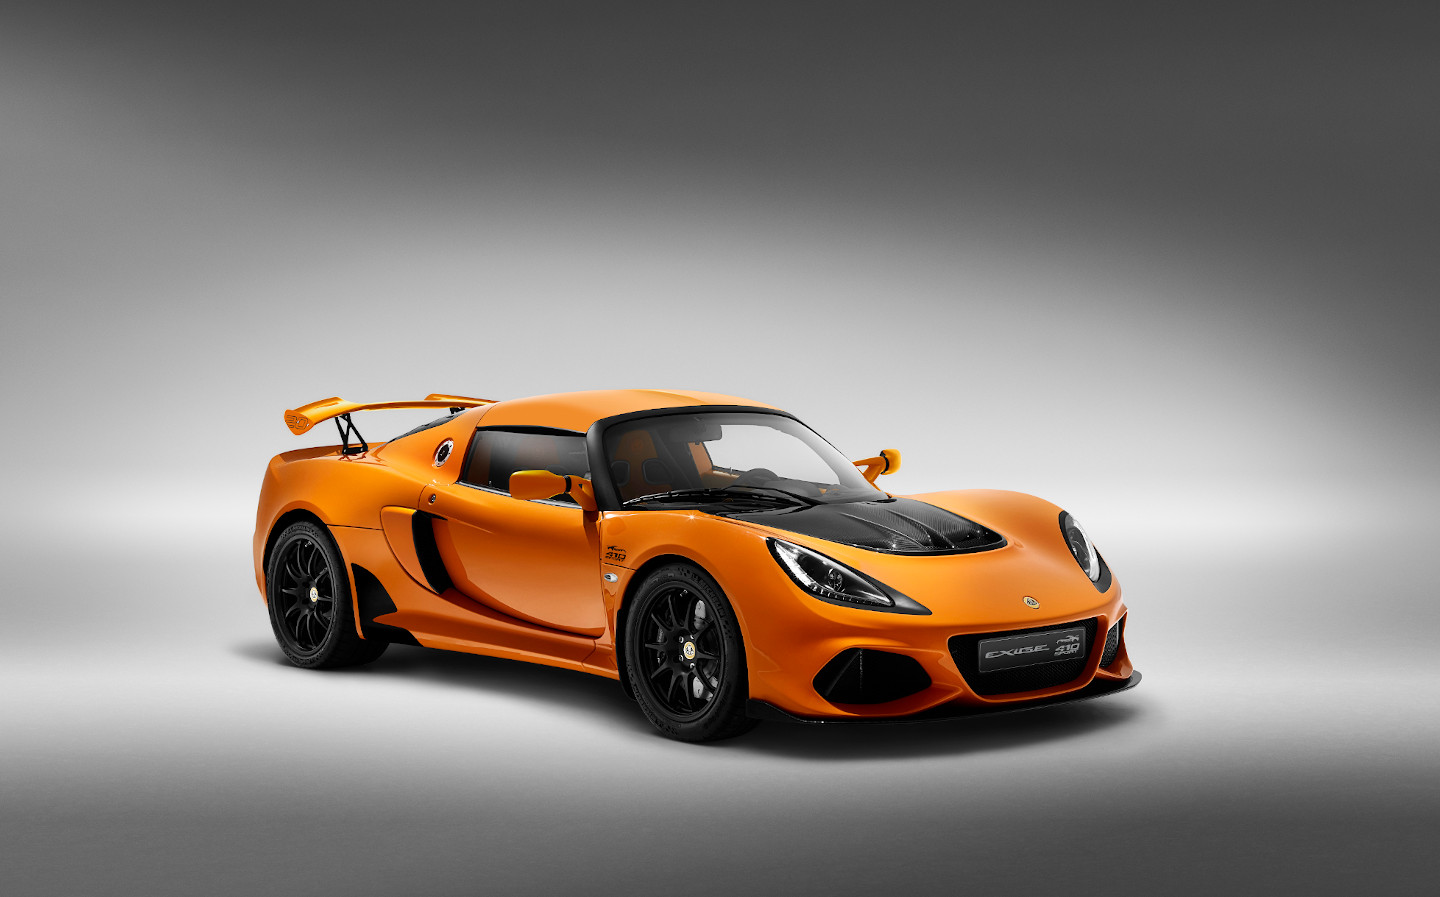 Lotus Exige turns 20 with special edition